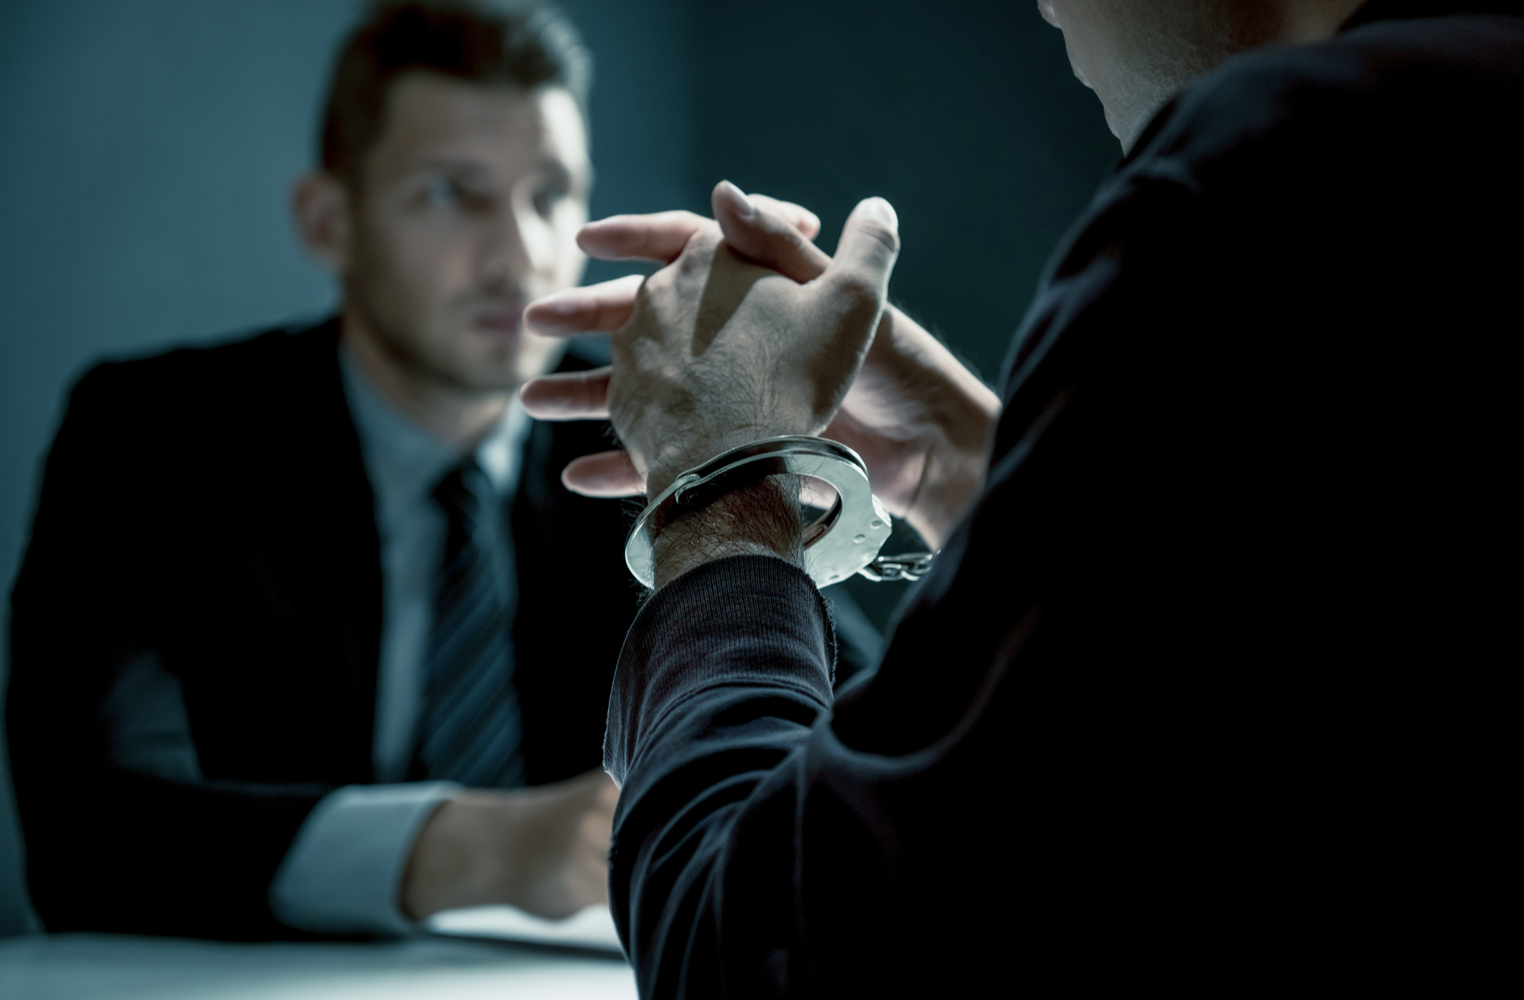 'We're Going to Find You' - Undercover Agents Continue Trading Prison Time for Bitcoins